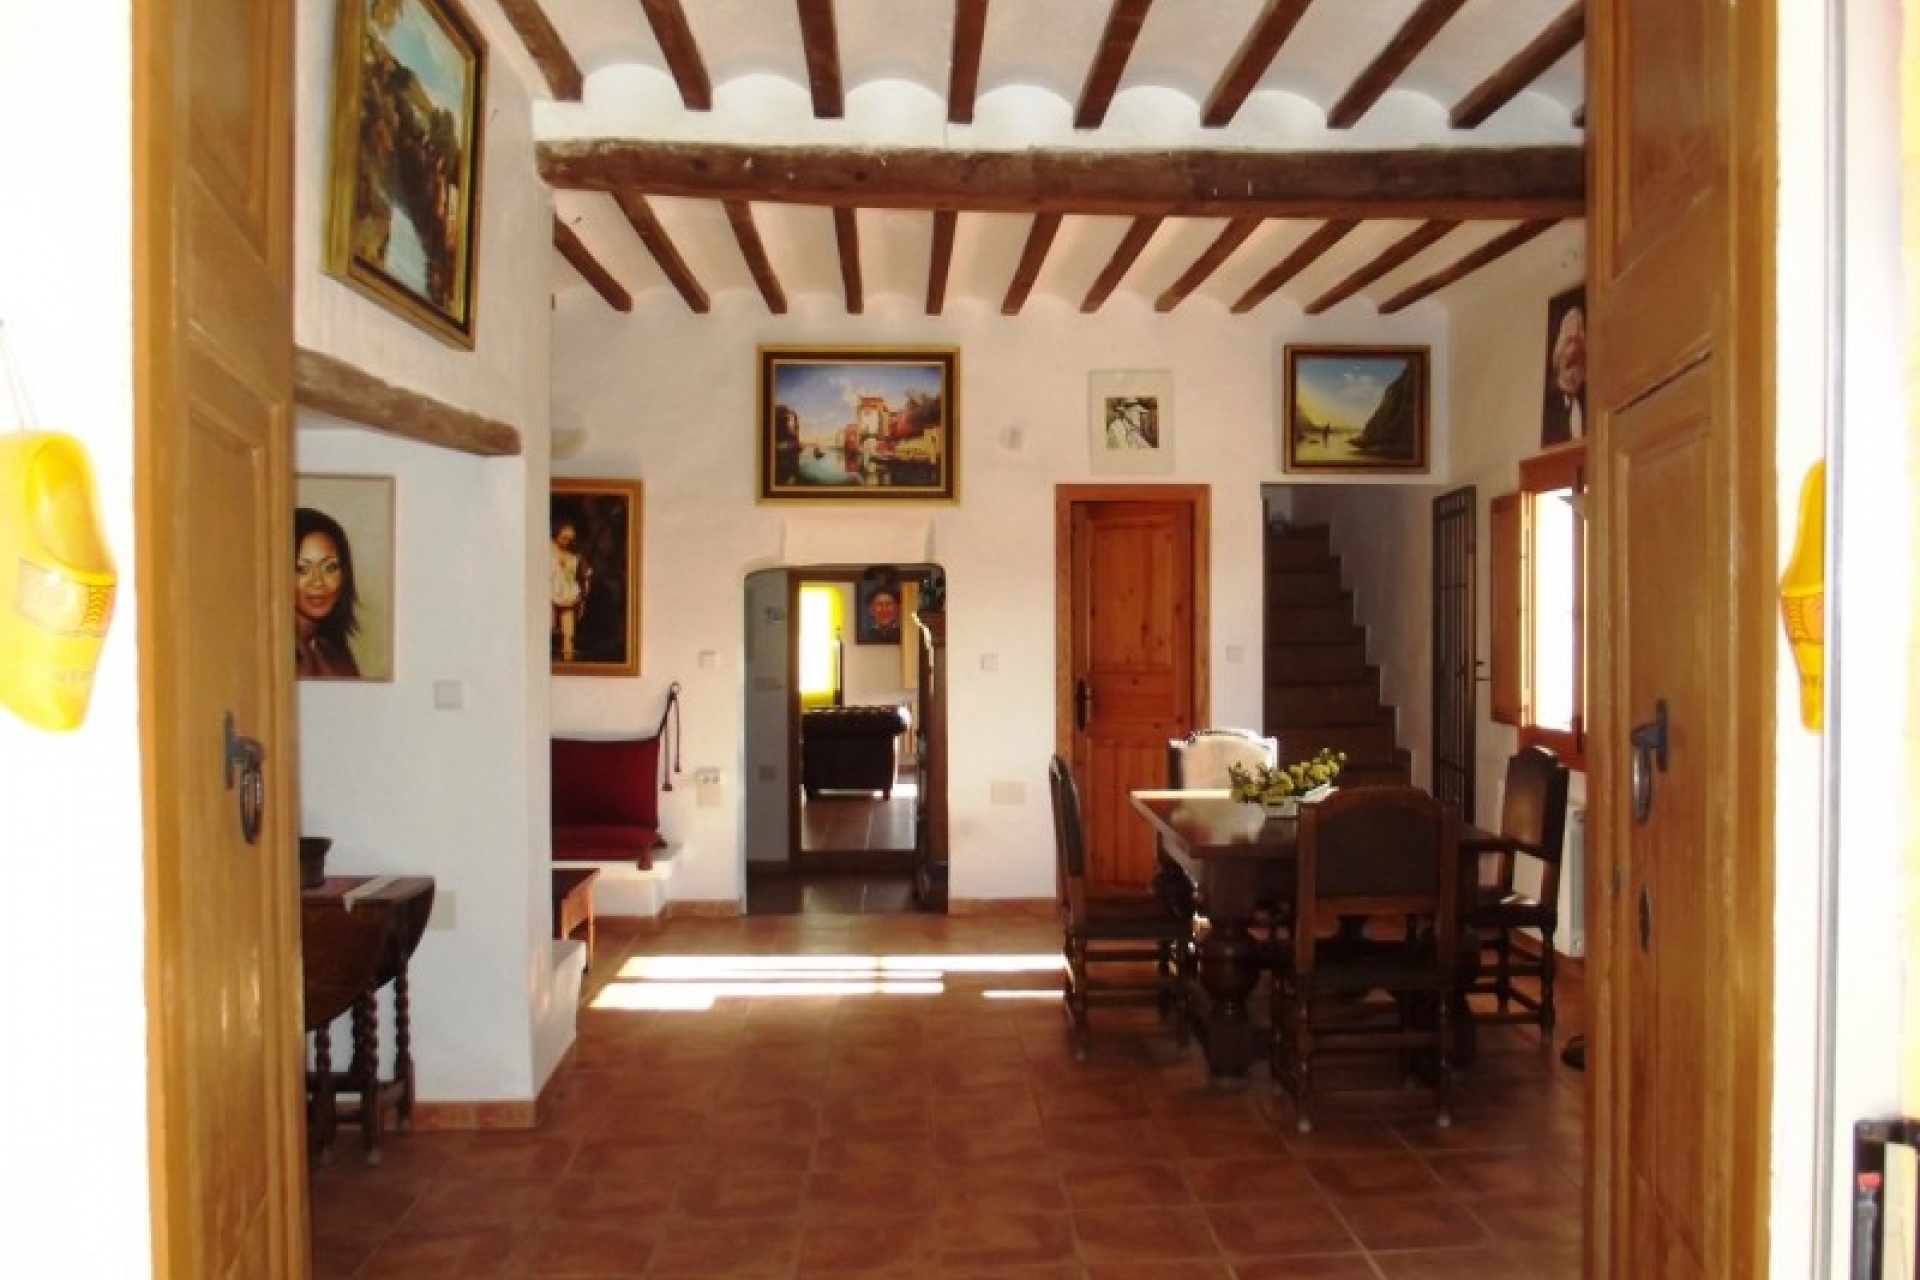 Bargain Finca for sale in Aspe near Elche and Alicante property for sale on Spains Costa Blanca cheap property for sale.